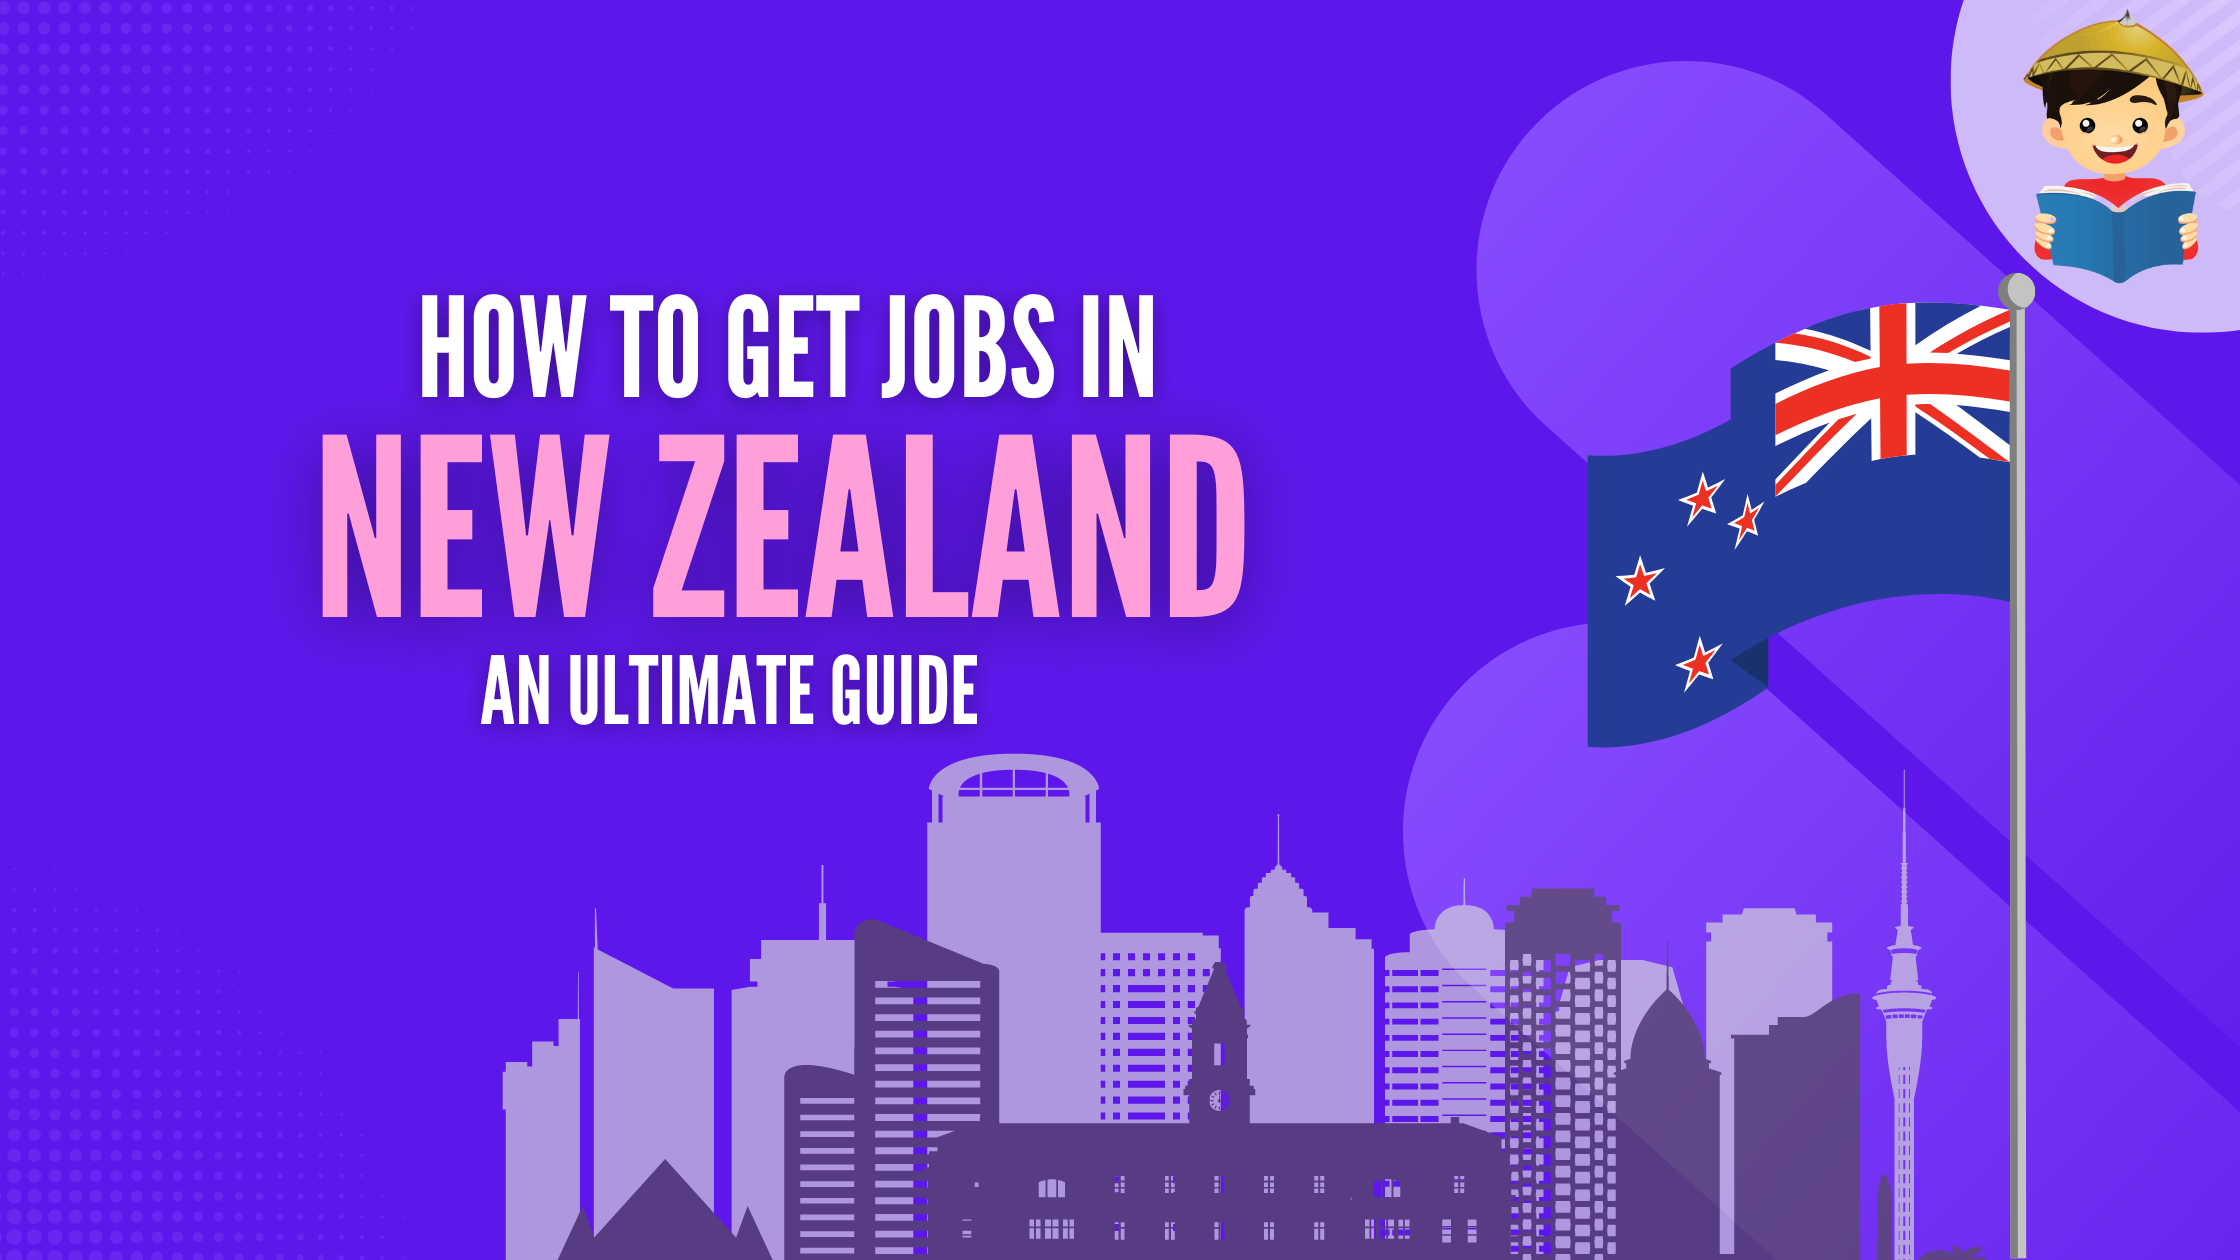 Jobs-in-New-Zealand-featured-image